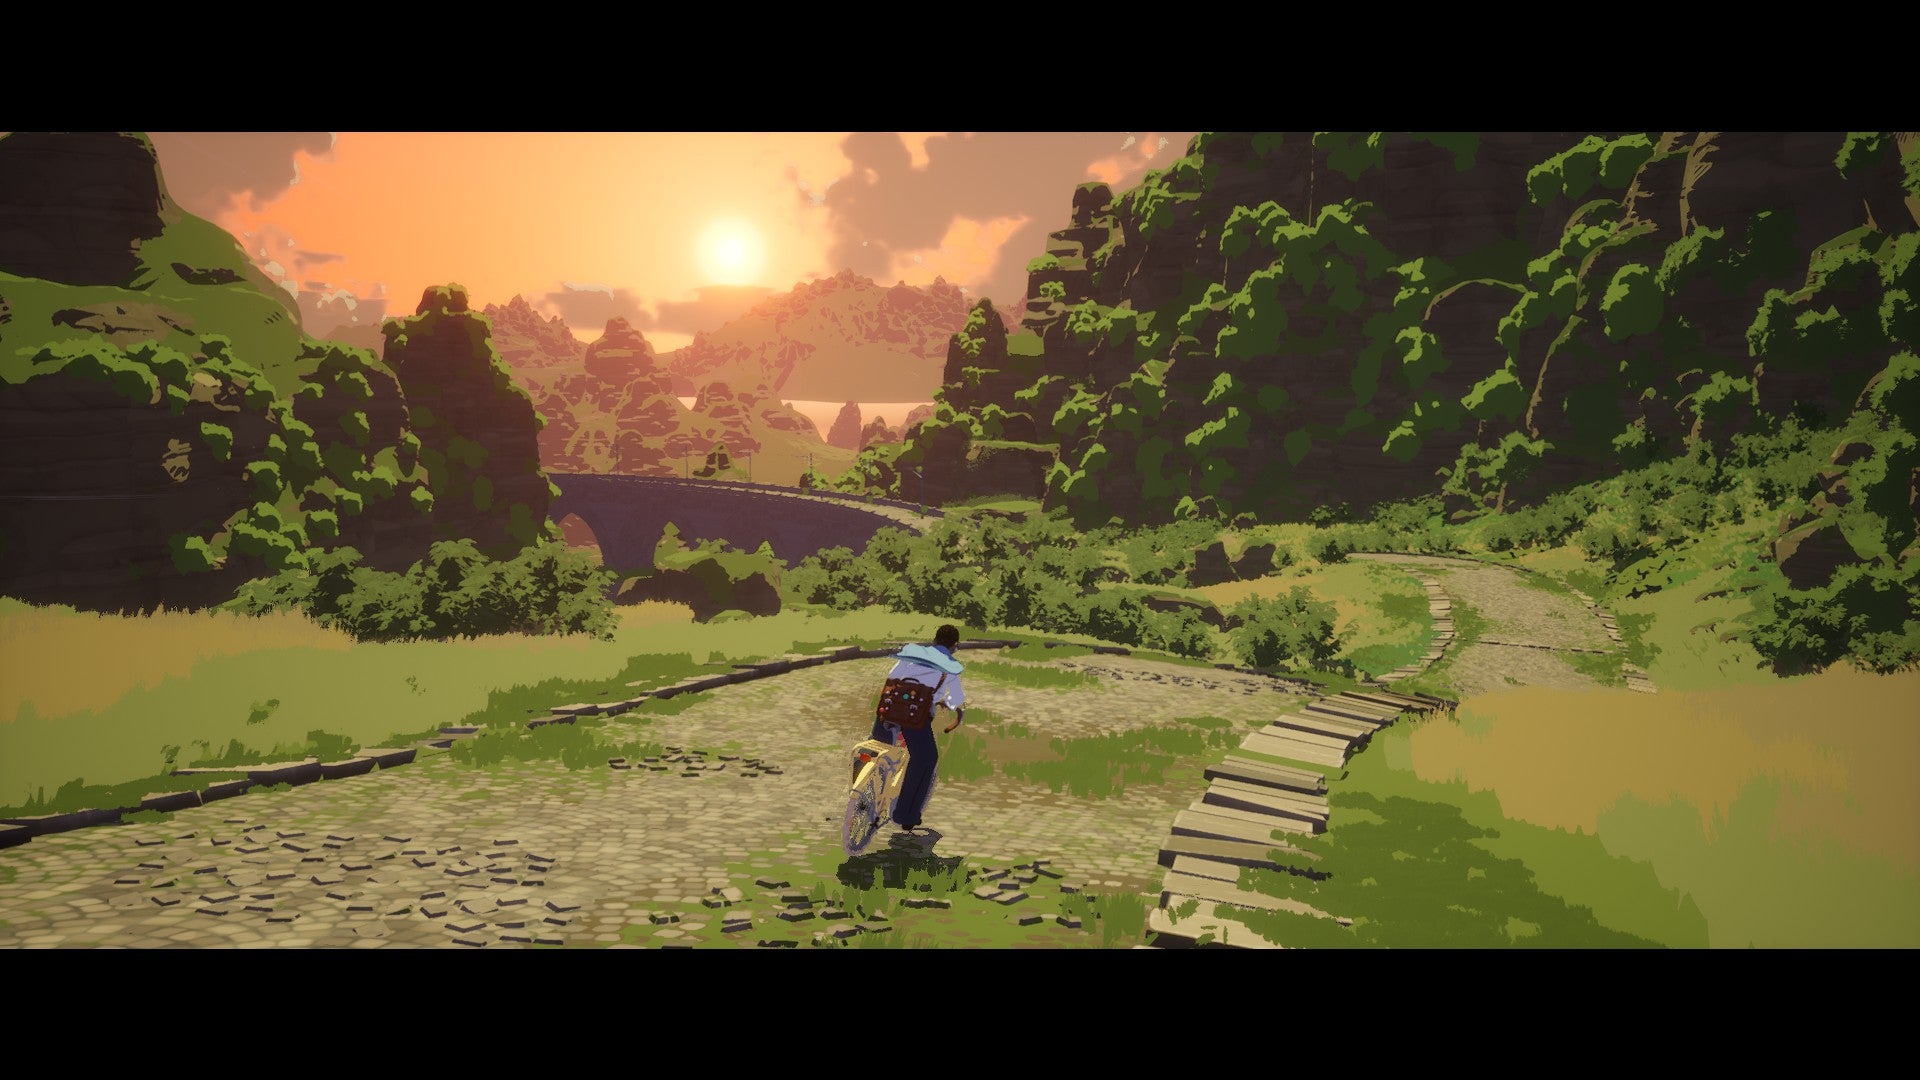 A screenshot from Season showing Estelle ride her bicycle down a stone path into a picturesque valley